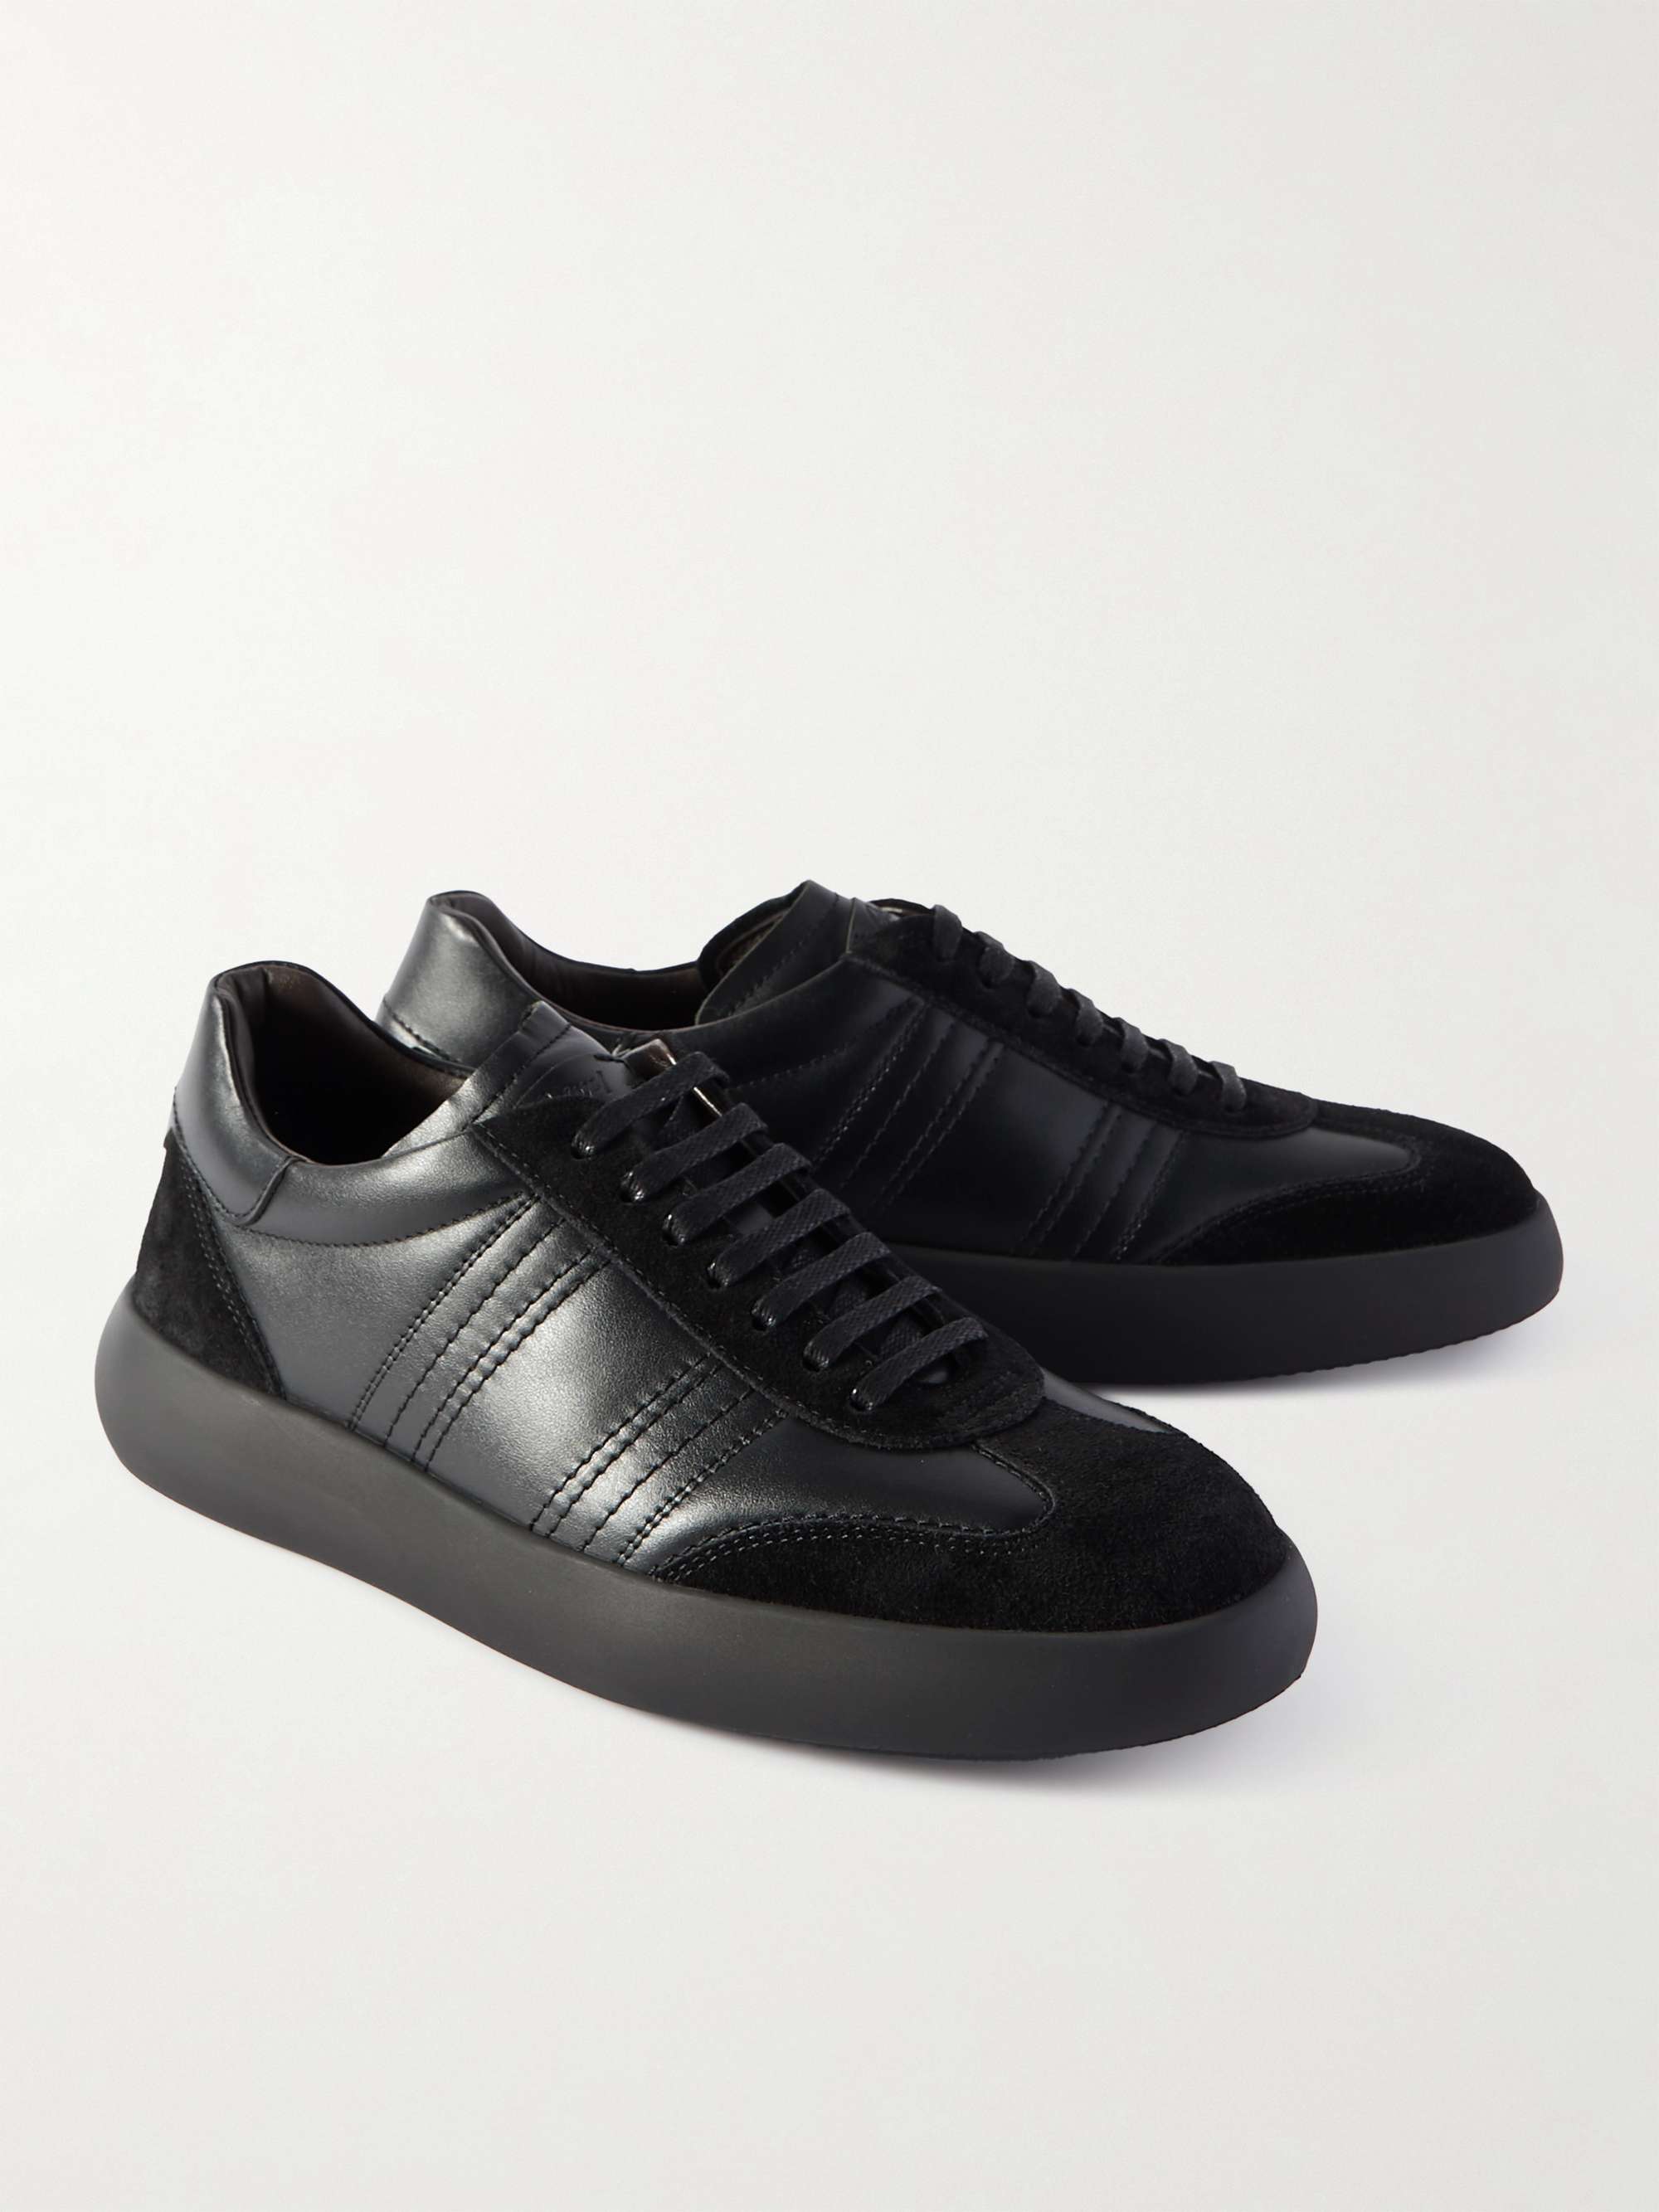 BRIONI Suede-Trimmed Leather Sneakers for Men | MR PORTER